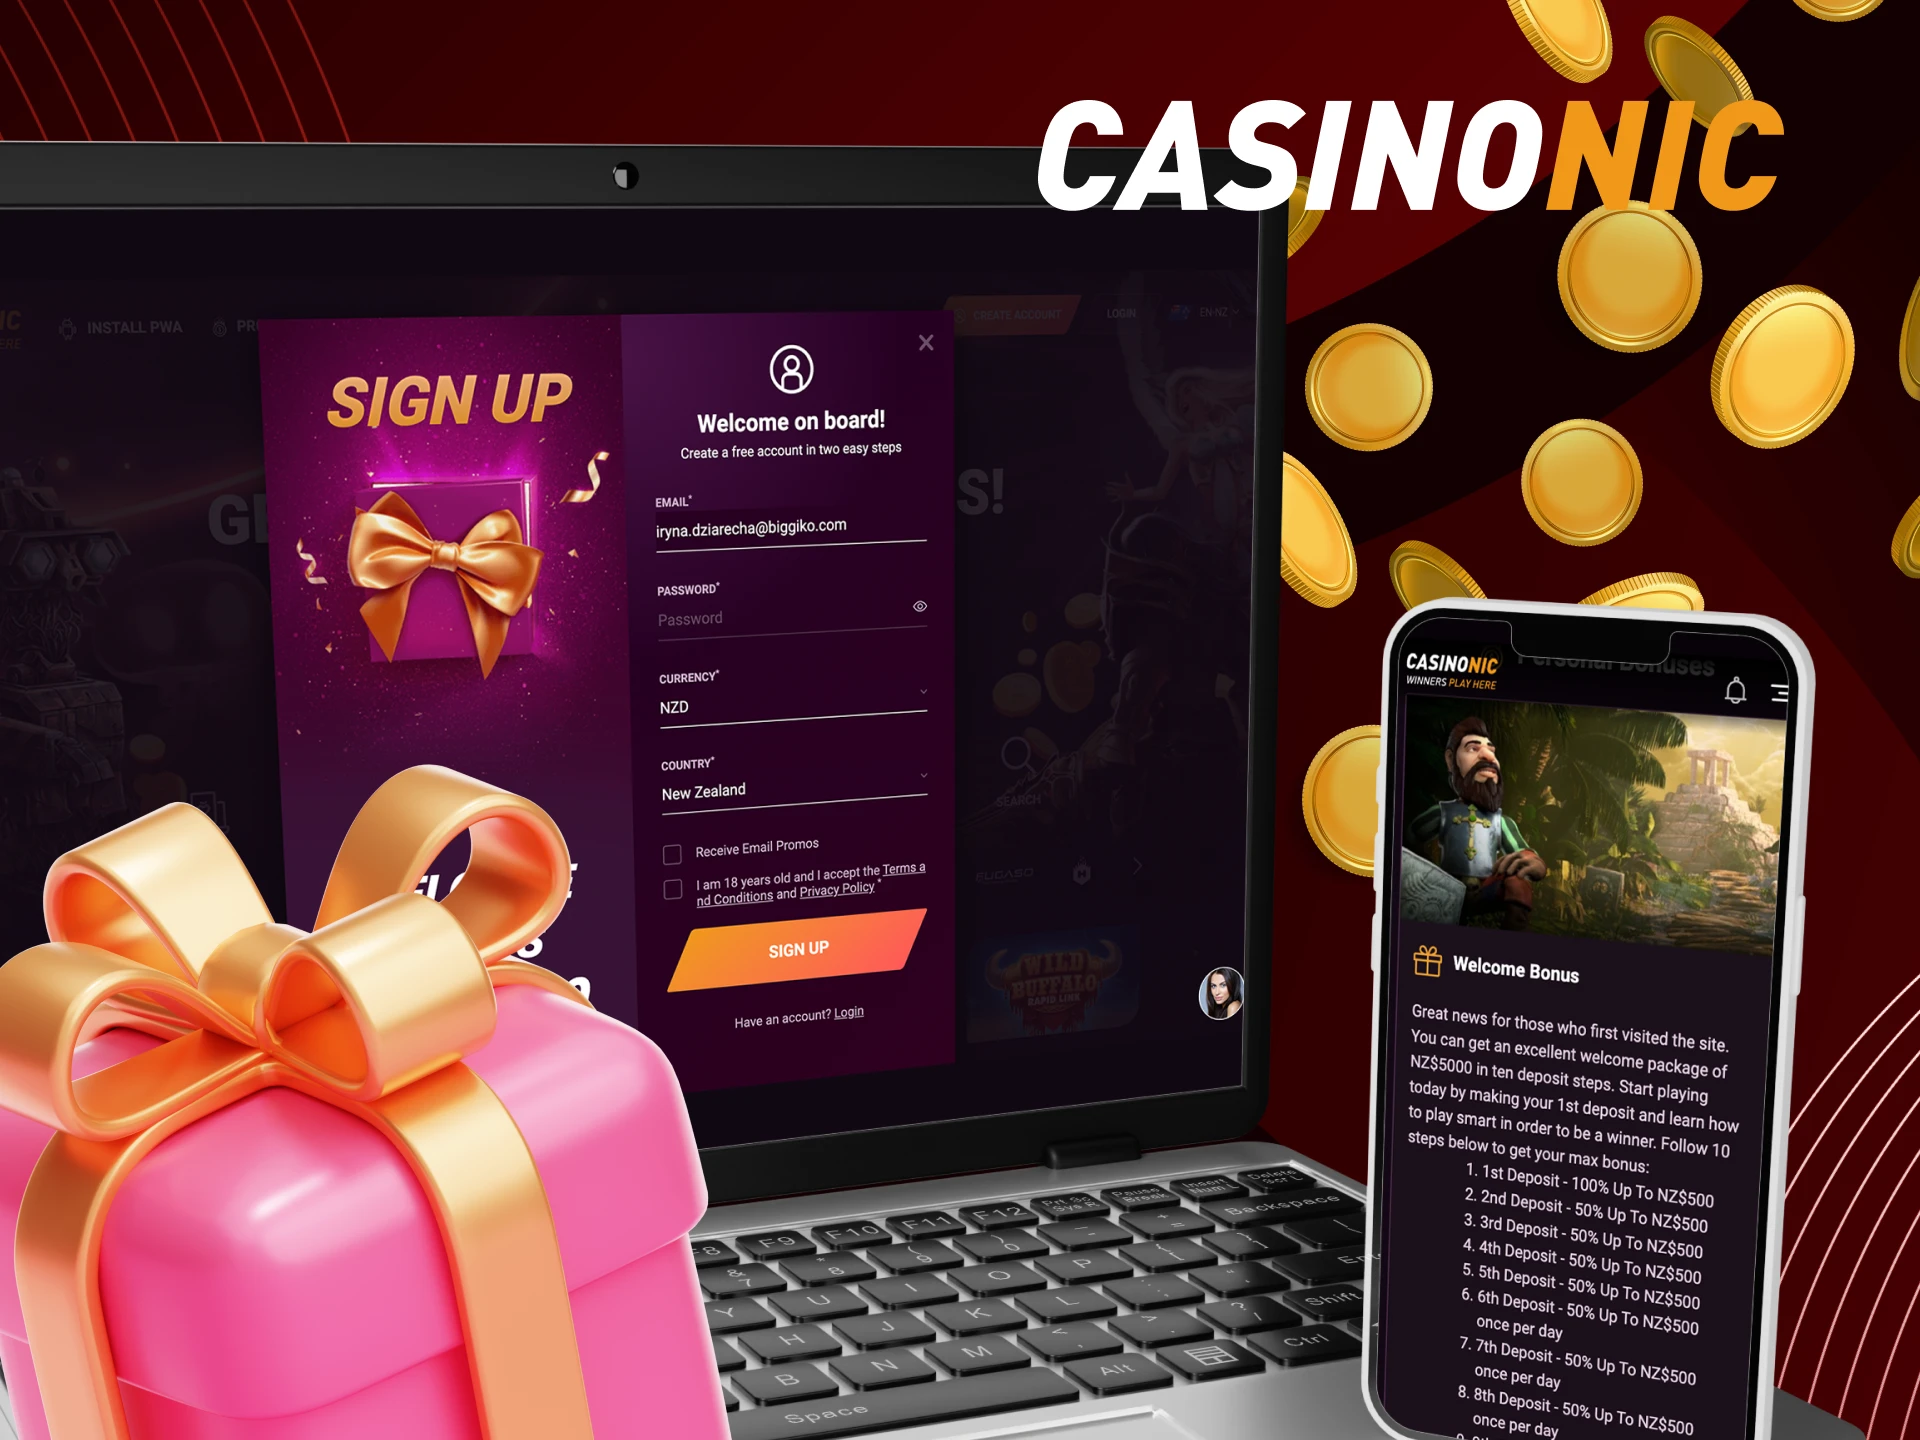 Is there a welcome bonus for players at CasinoNic online casino after registration.